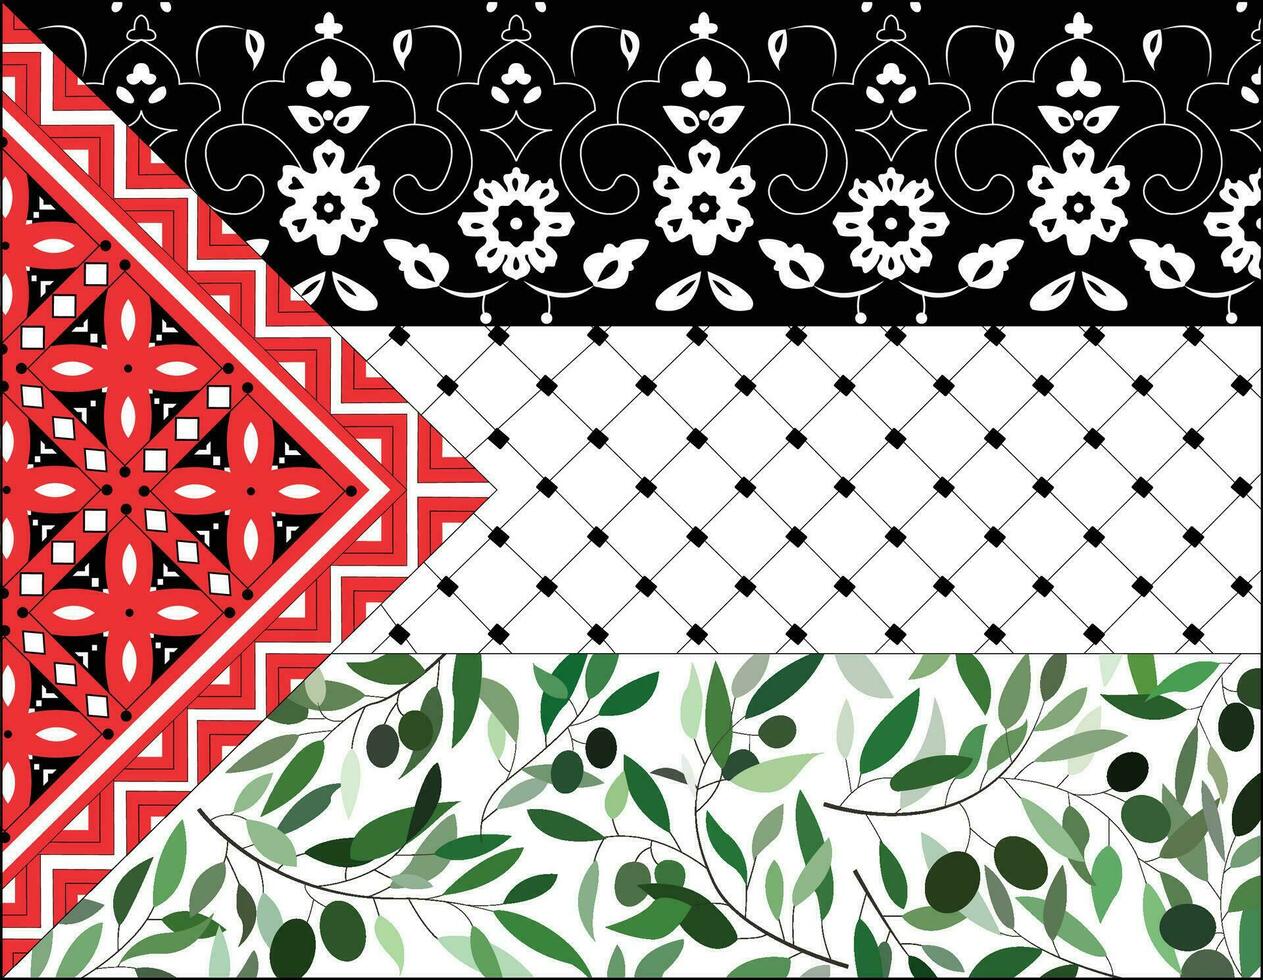 PALESTINE flag from ornaments and olives and Palestinian scarf which called in arabic kufiya, olive tree with olives, suitable for social media meda and t shirt prints, good for posters and banners vector